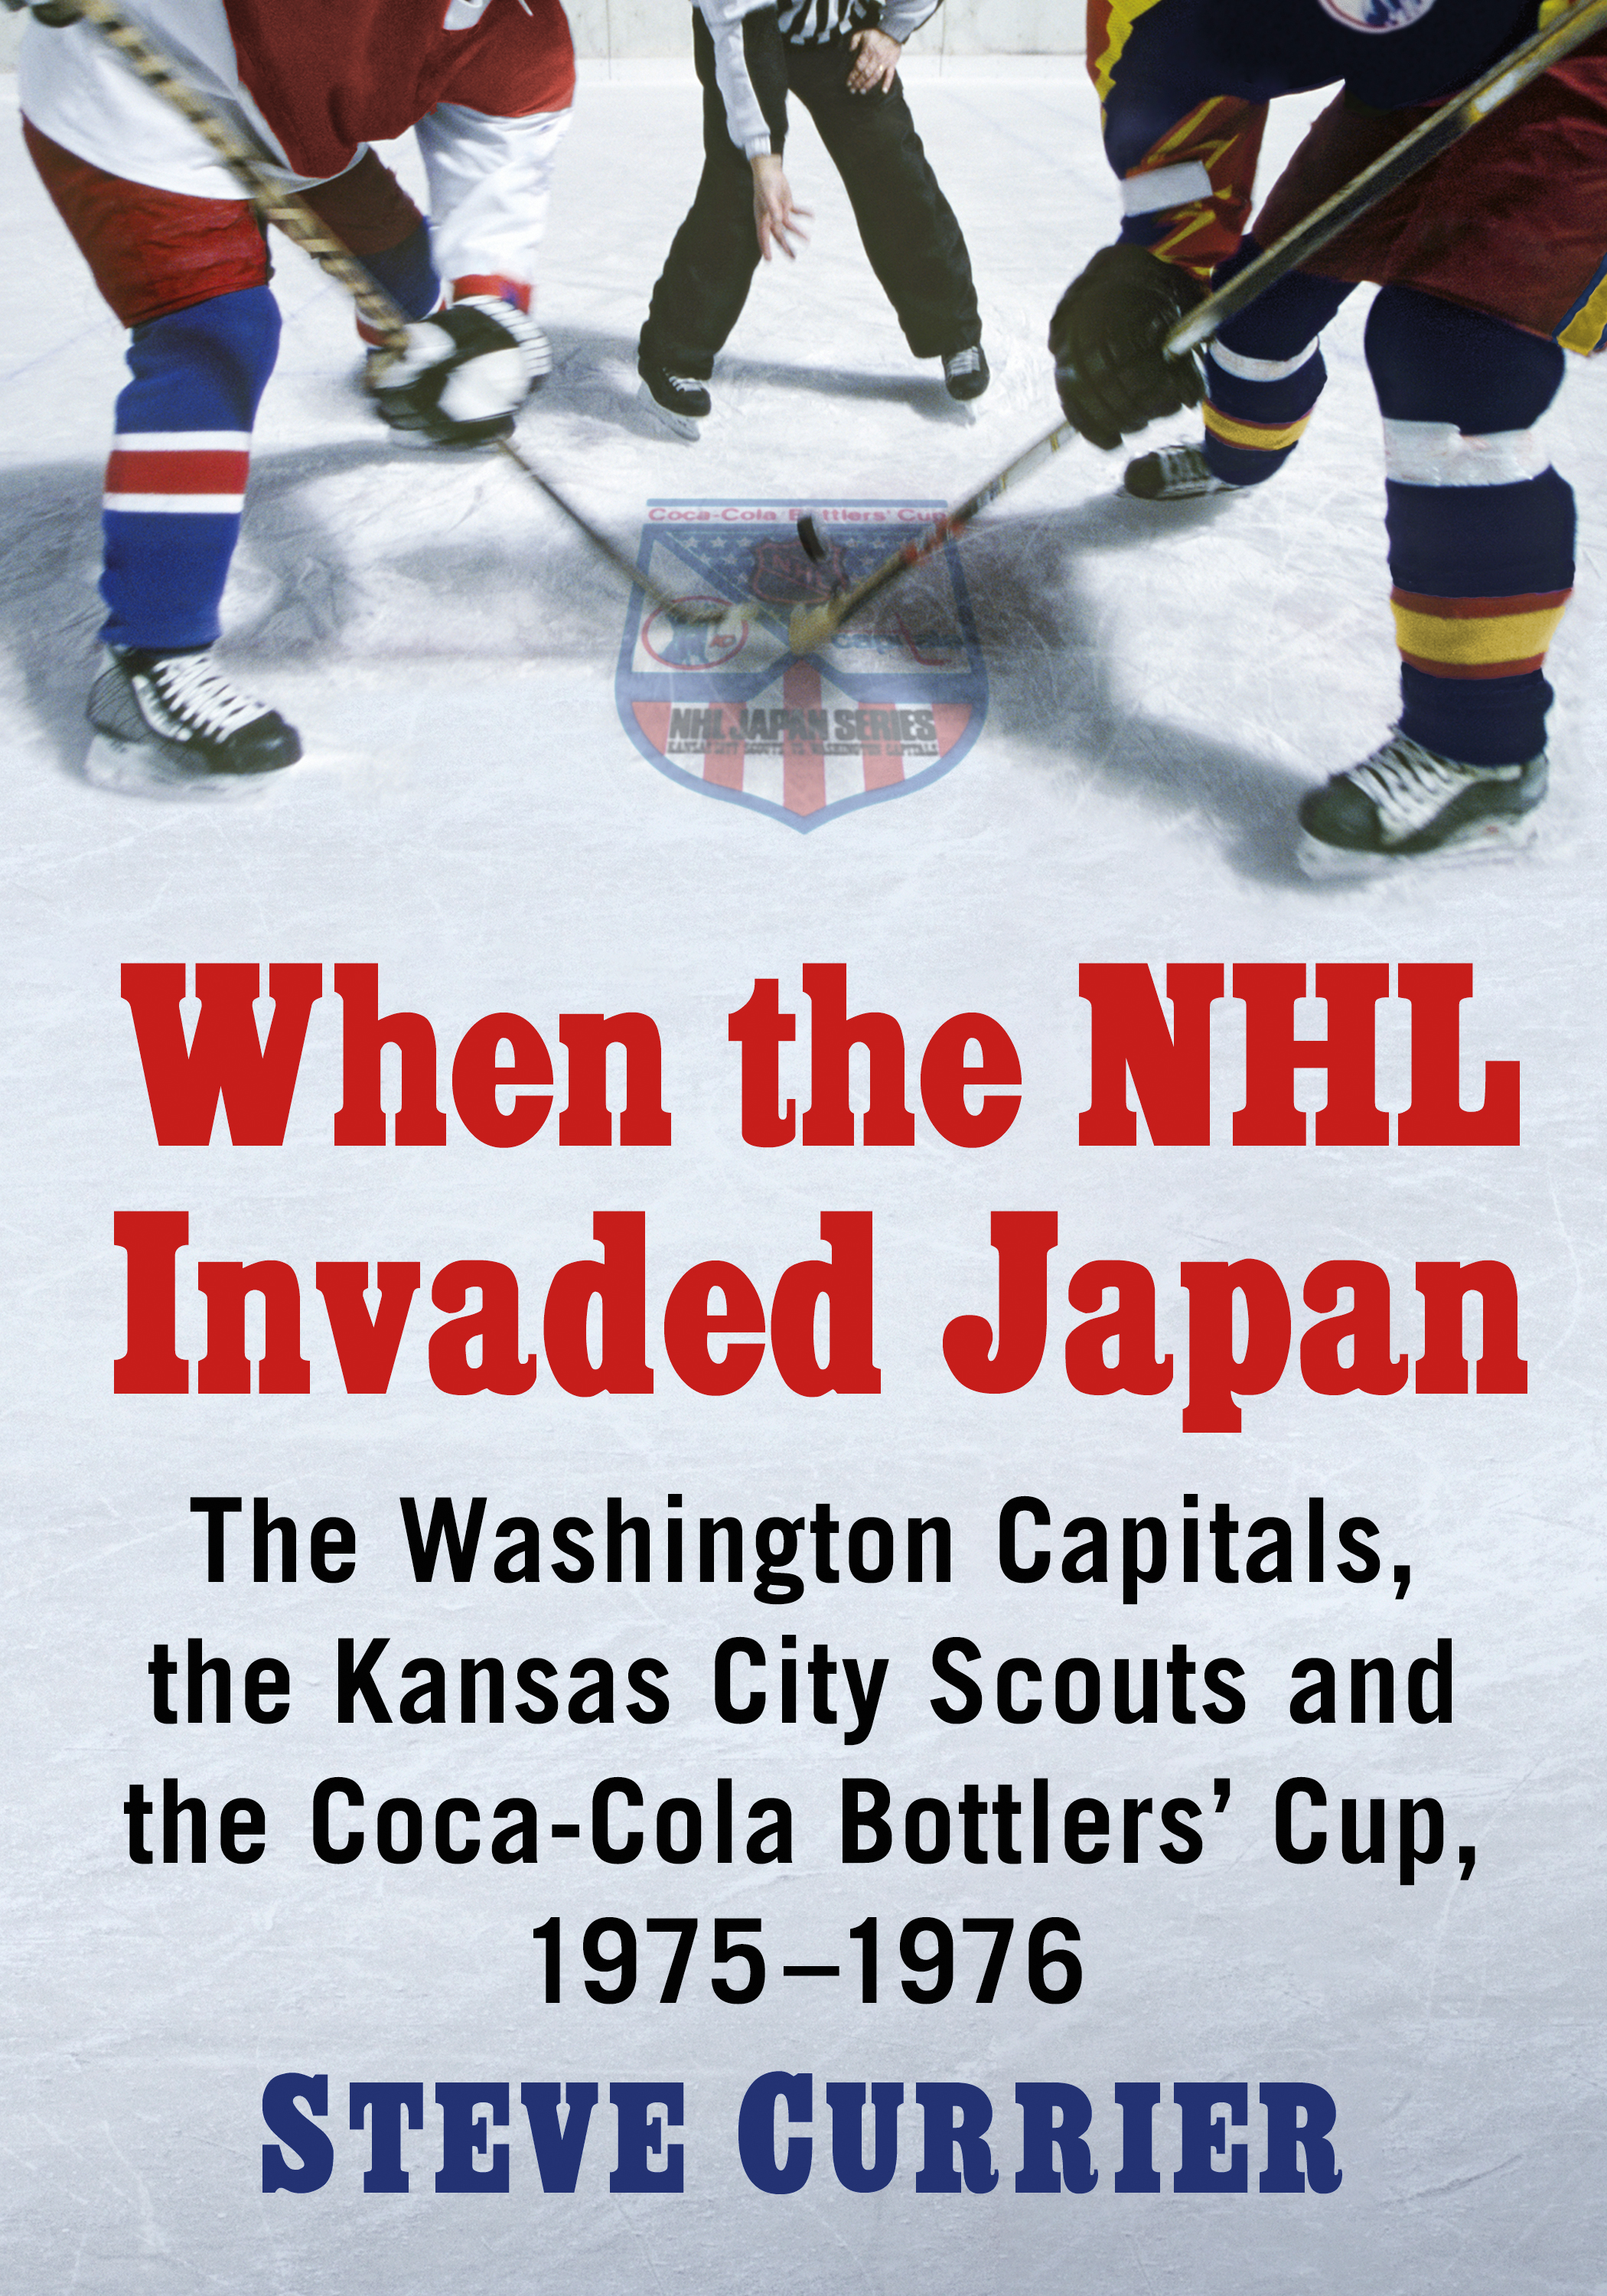 When the NHL Invaded Japan - 15-24.99